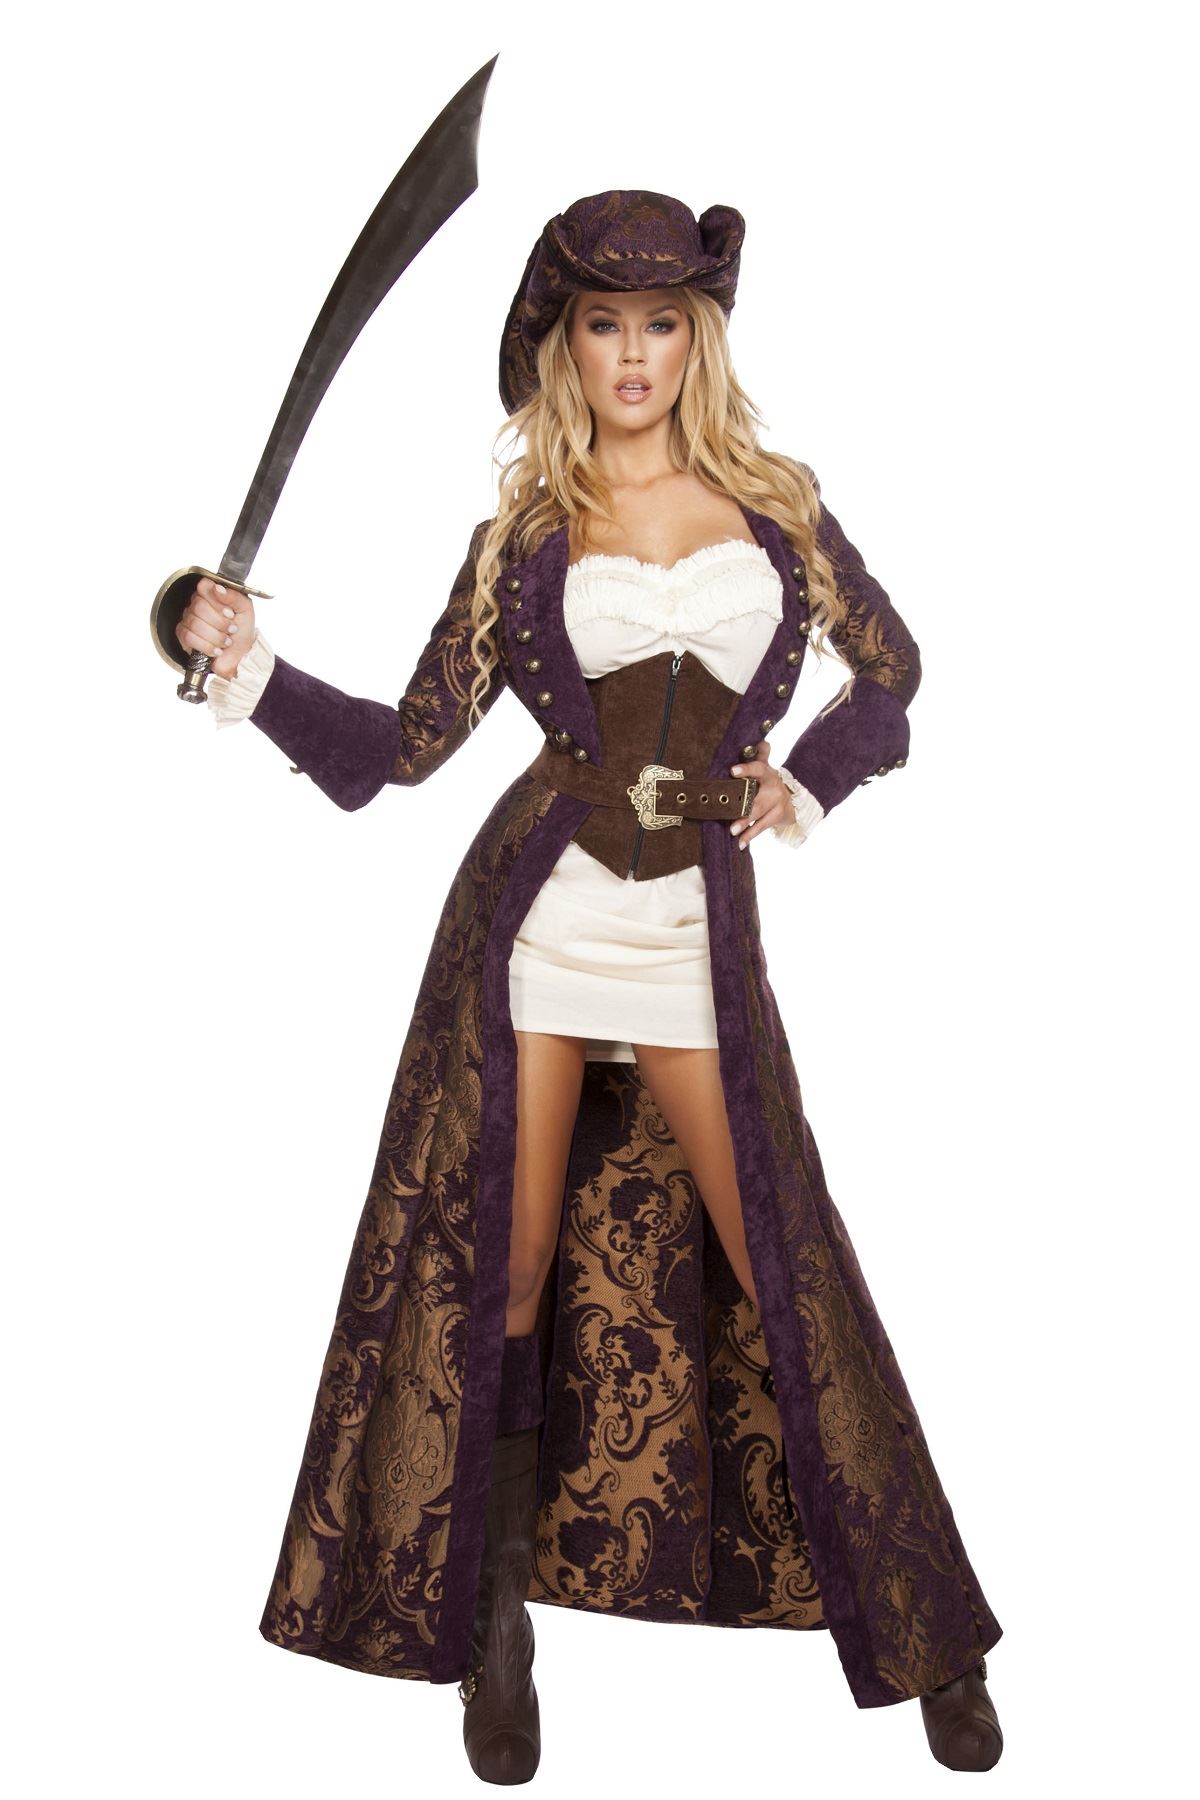 Adult Decadent Pirate Diva Woman Deluxe Costume 22999 The Costume Land 6812